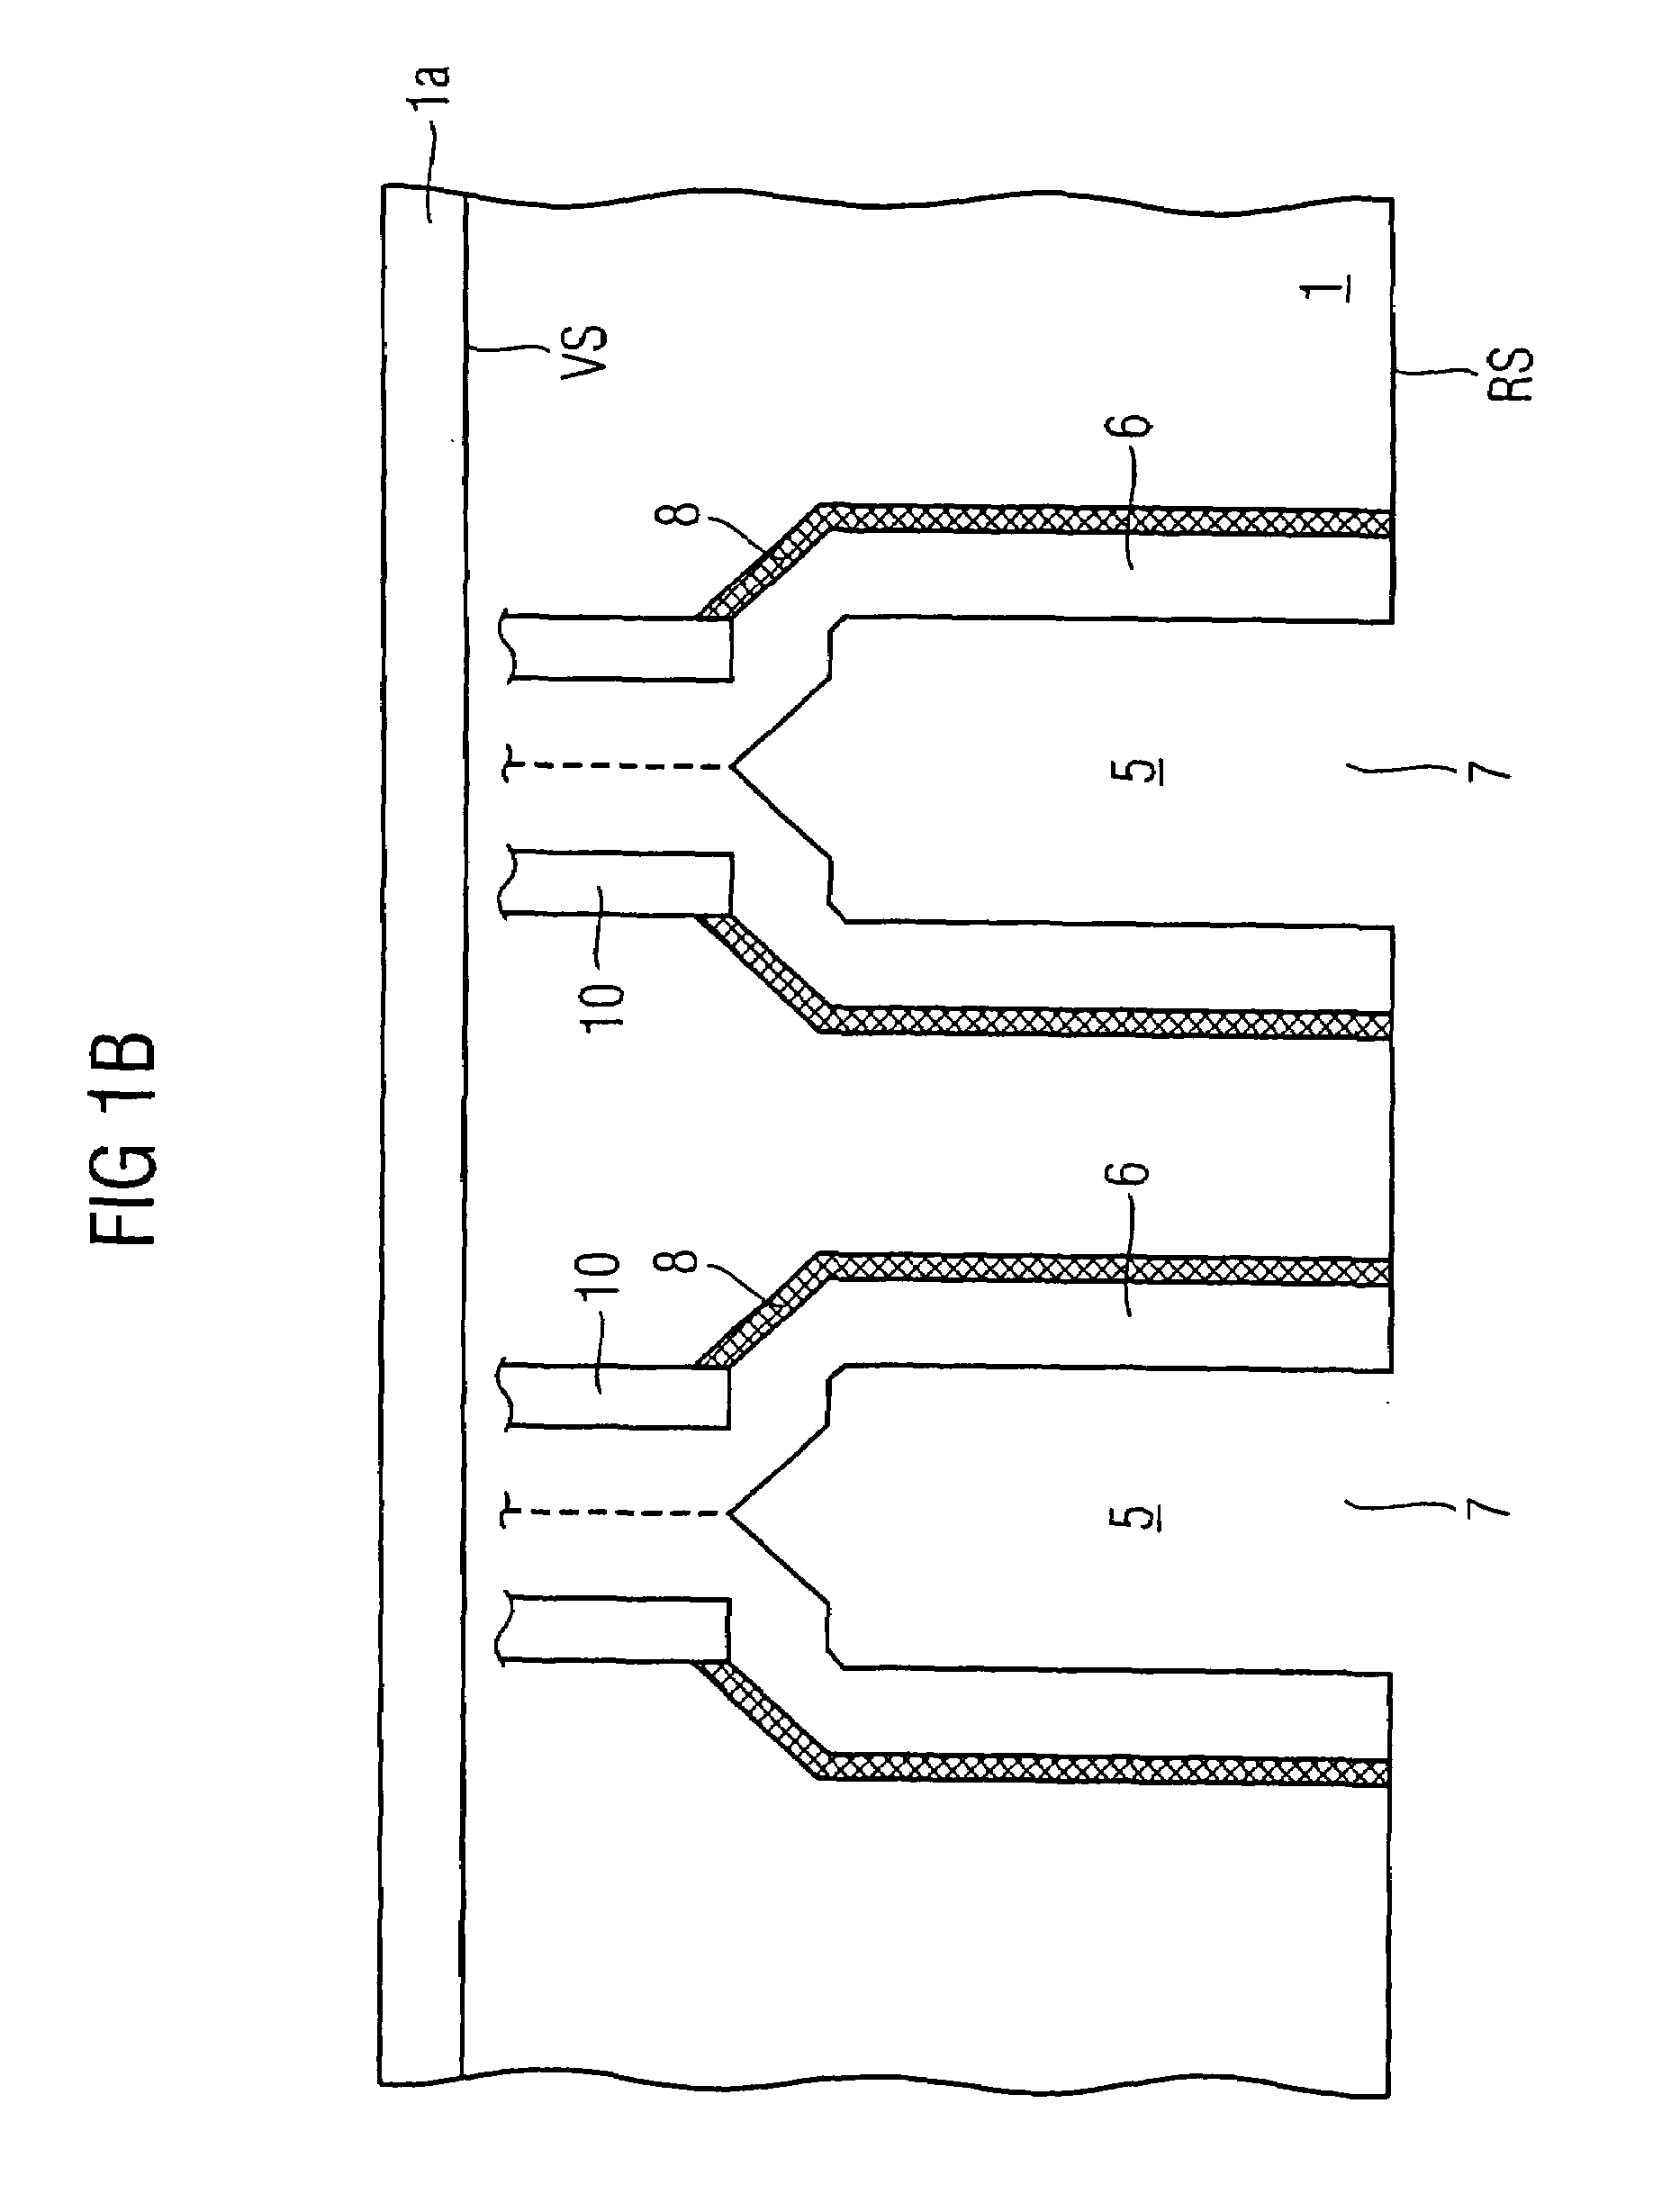 Fabrication method for a semiconductor structure having integrated capacitors